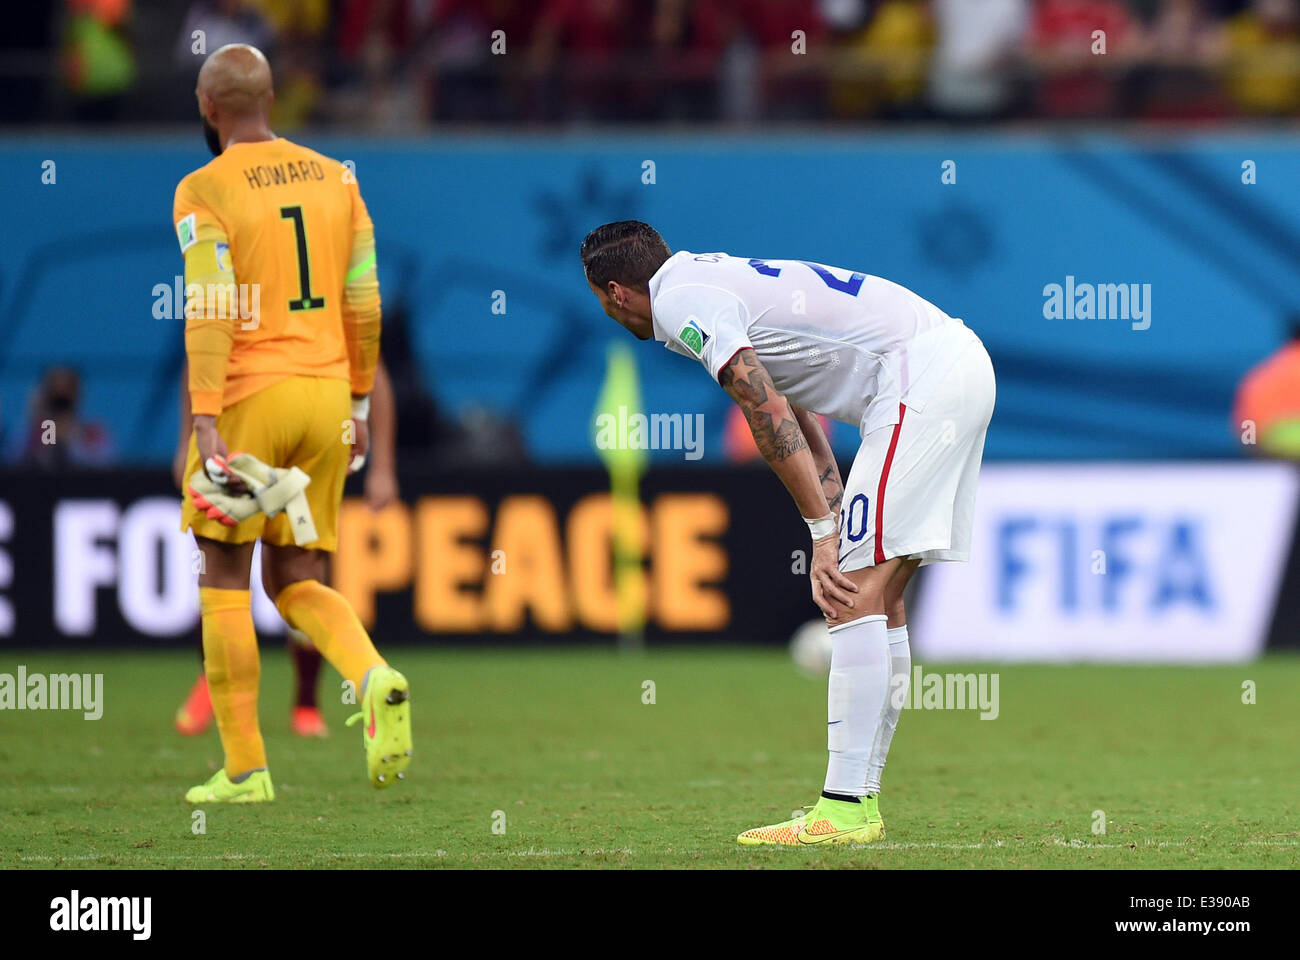 Manaus, Brazil. 22nd June, 2014. Goalkeeper Tim Howard (L) of USA leaves the pitch after the FIFA World Cup 2014 group G preliminary round match between the USA and Portugal at the Arena Amazonia Stadium in Manaus, Brazil, 22 June 2014. Photo: Marius Becker/dpa/Alamy Live News Stock Photo